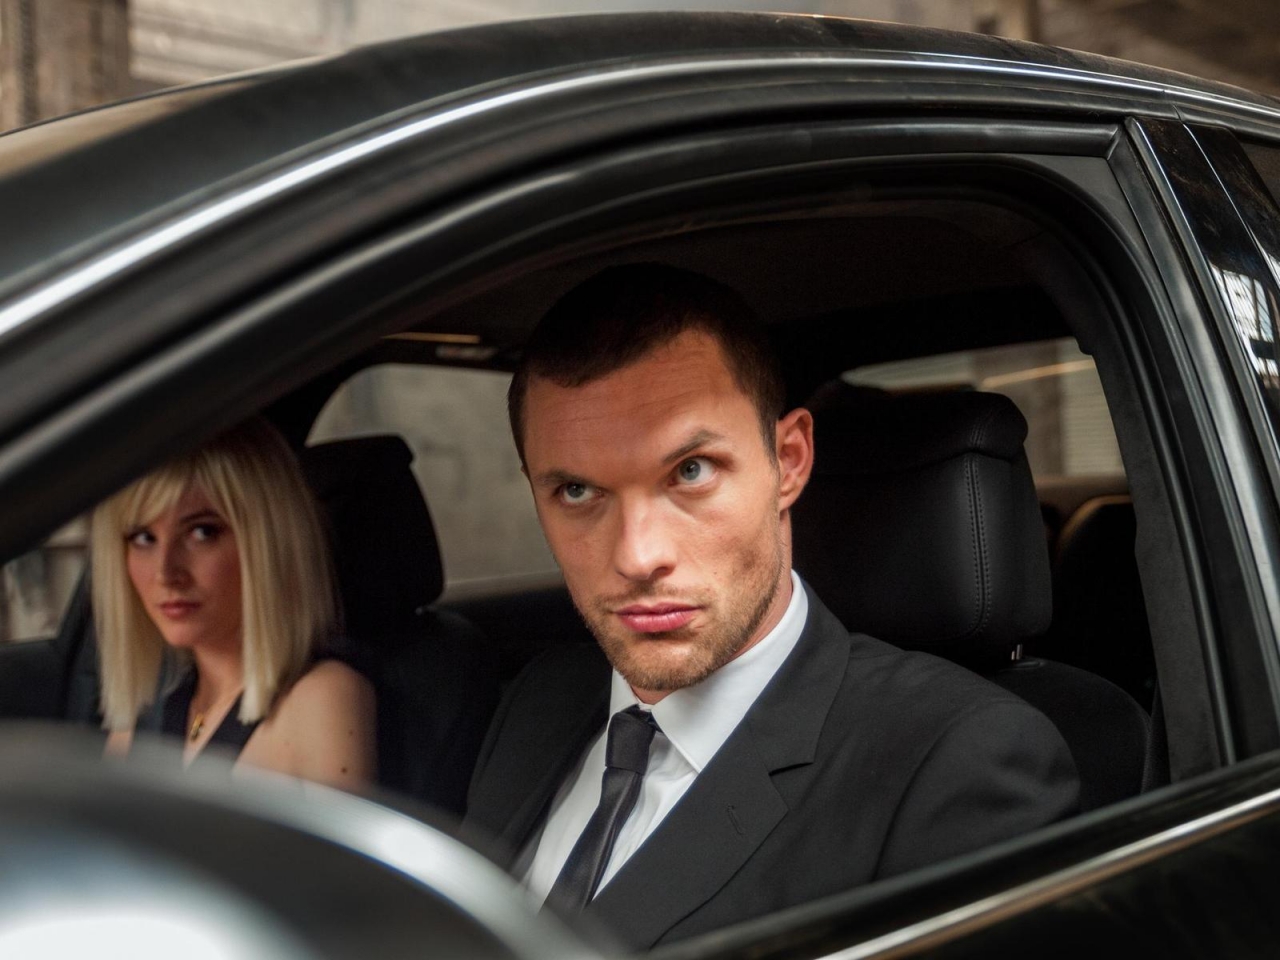 Transporter Refueled for 1280 x 960 resolution